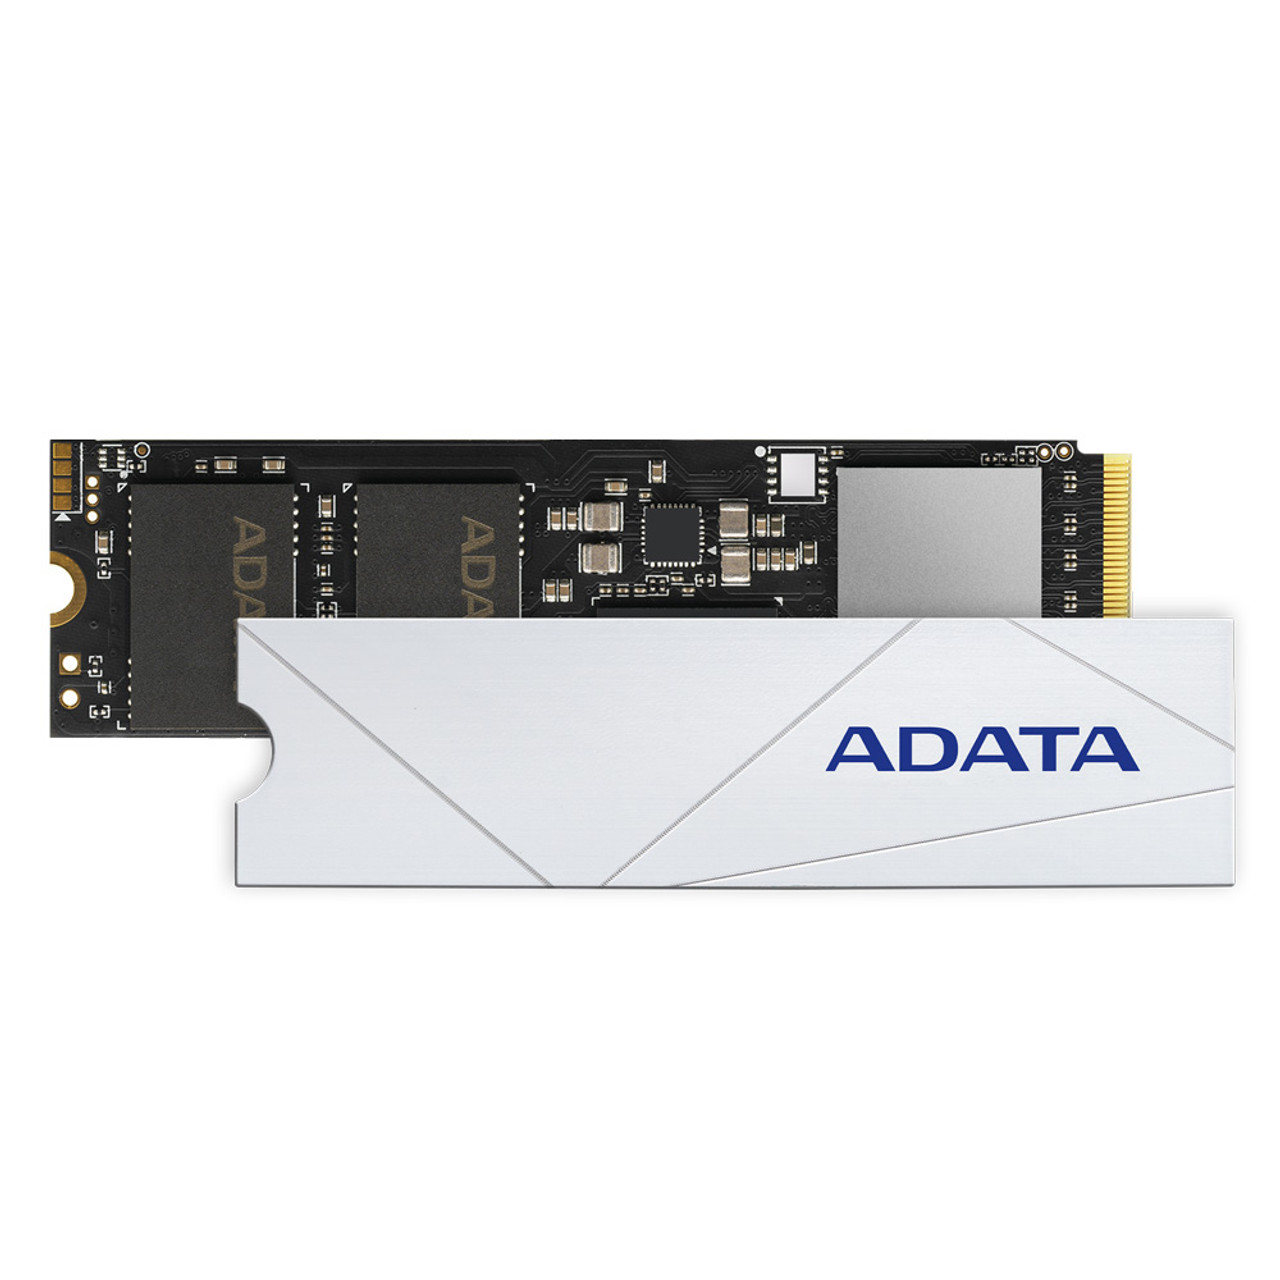 ADATA PREMIUM SSD FOR PS5 2TB PCIe Gen4 x4 M.2 2280 Internal Solid State  Drive | White SSD | Ideal for Gaming | PS5 Compatible - Innogrit IG5236 |  Up